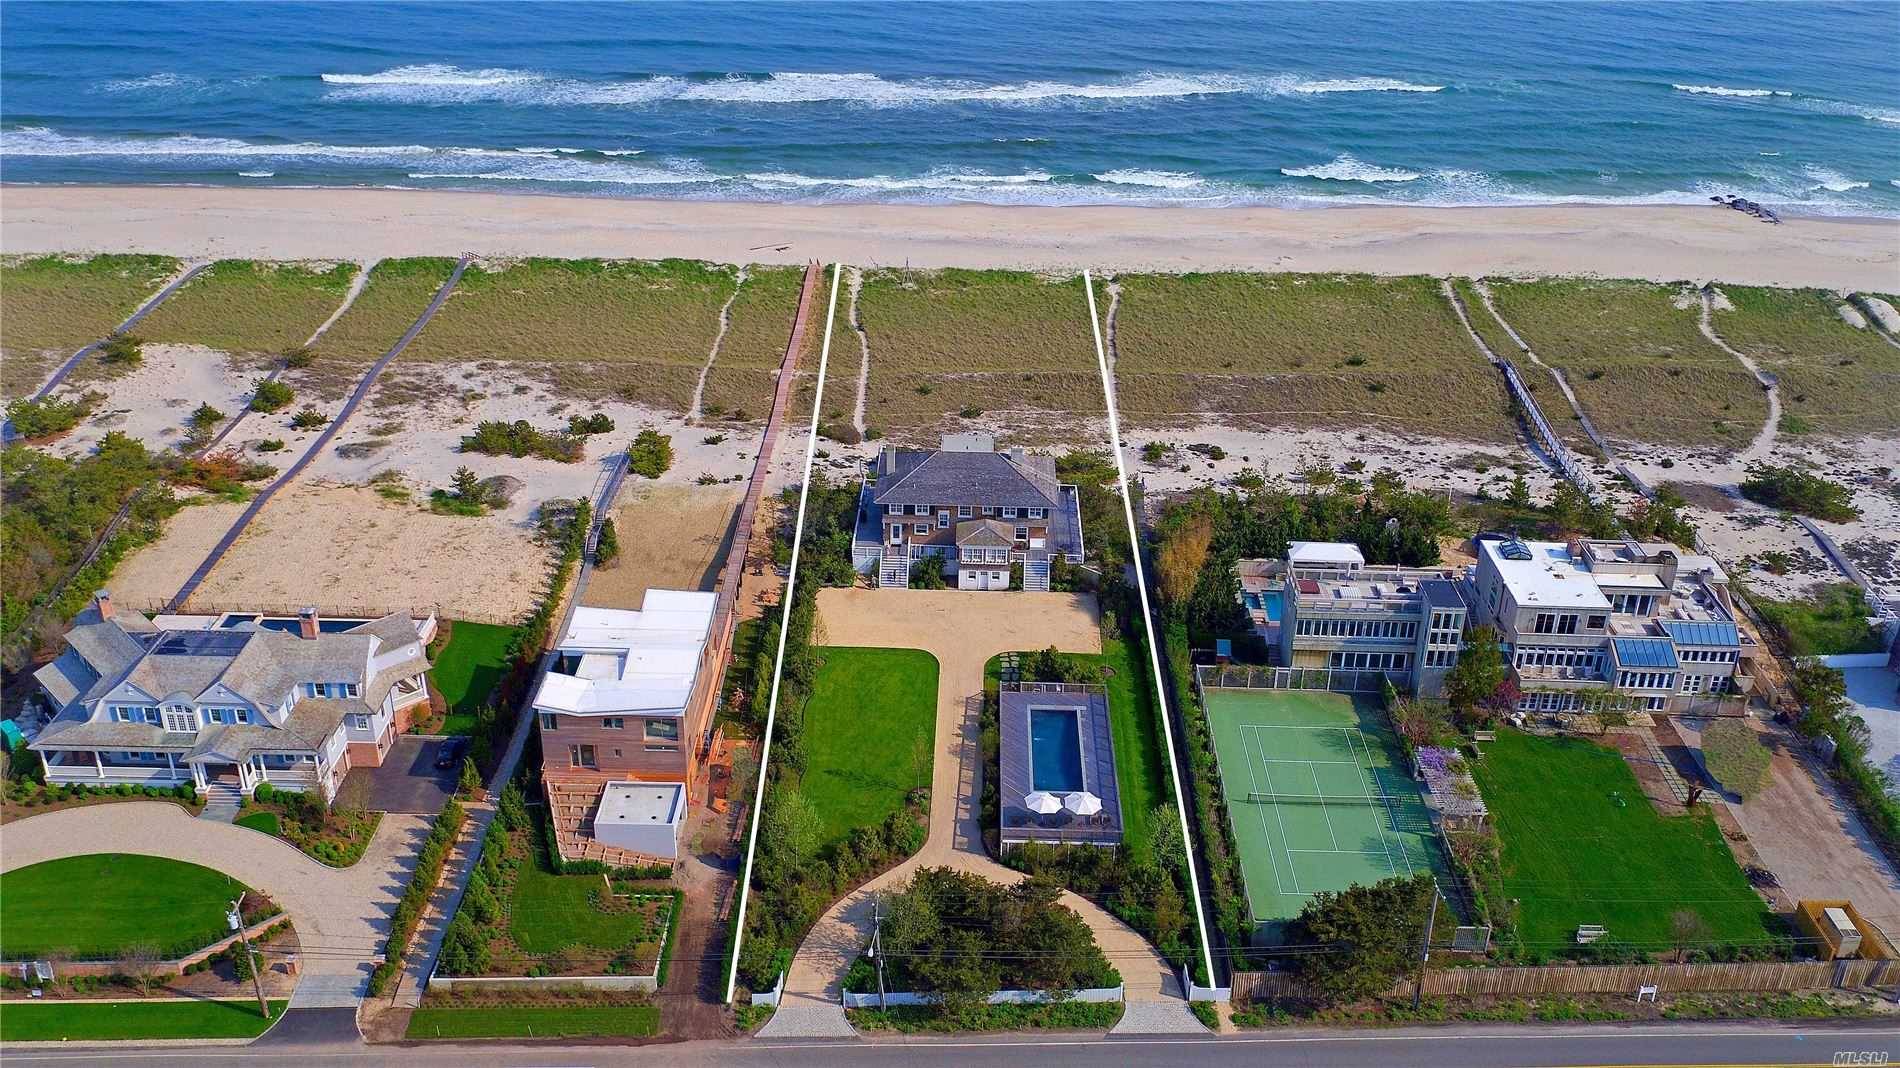 Don't miss this rare opportunity to own a prime oceanfront estate with a bayside dock, between the bridges, in Westhampton Beach.